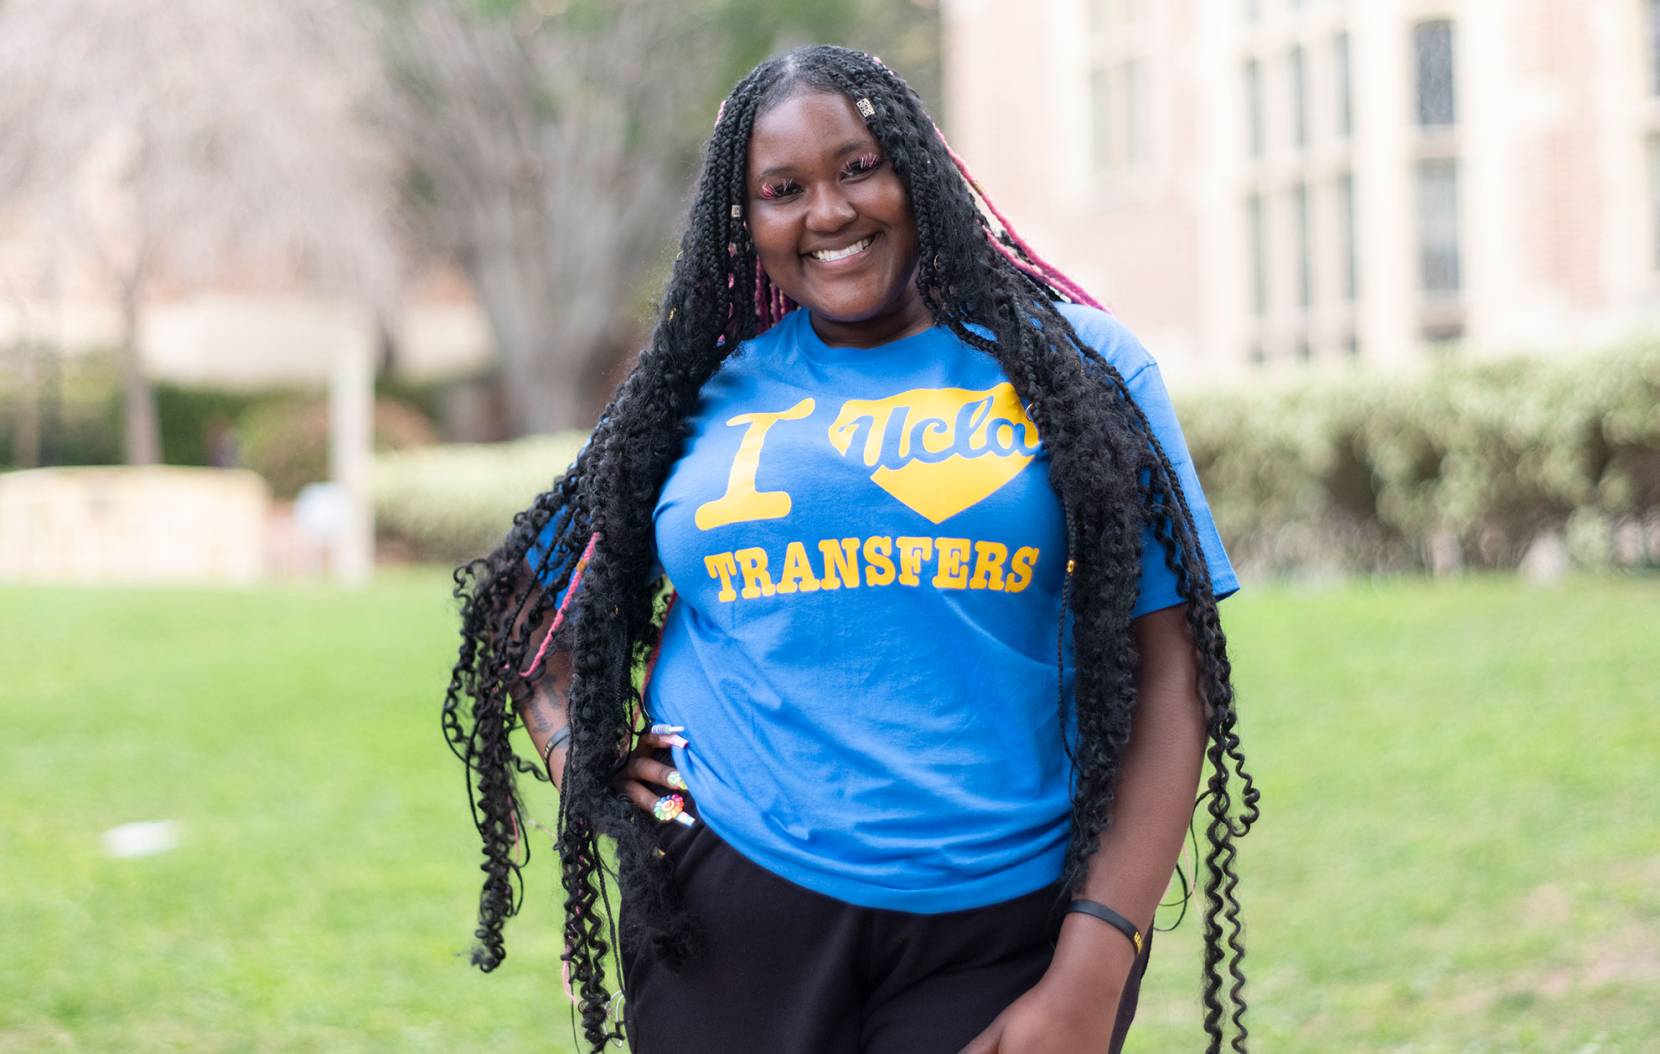 Student posing in a blue tshirt that says "I love UCLA transfers"